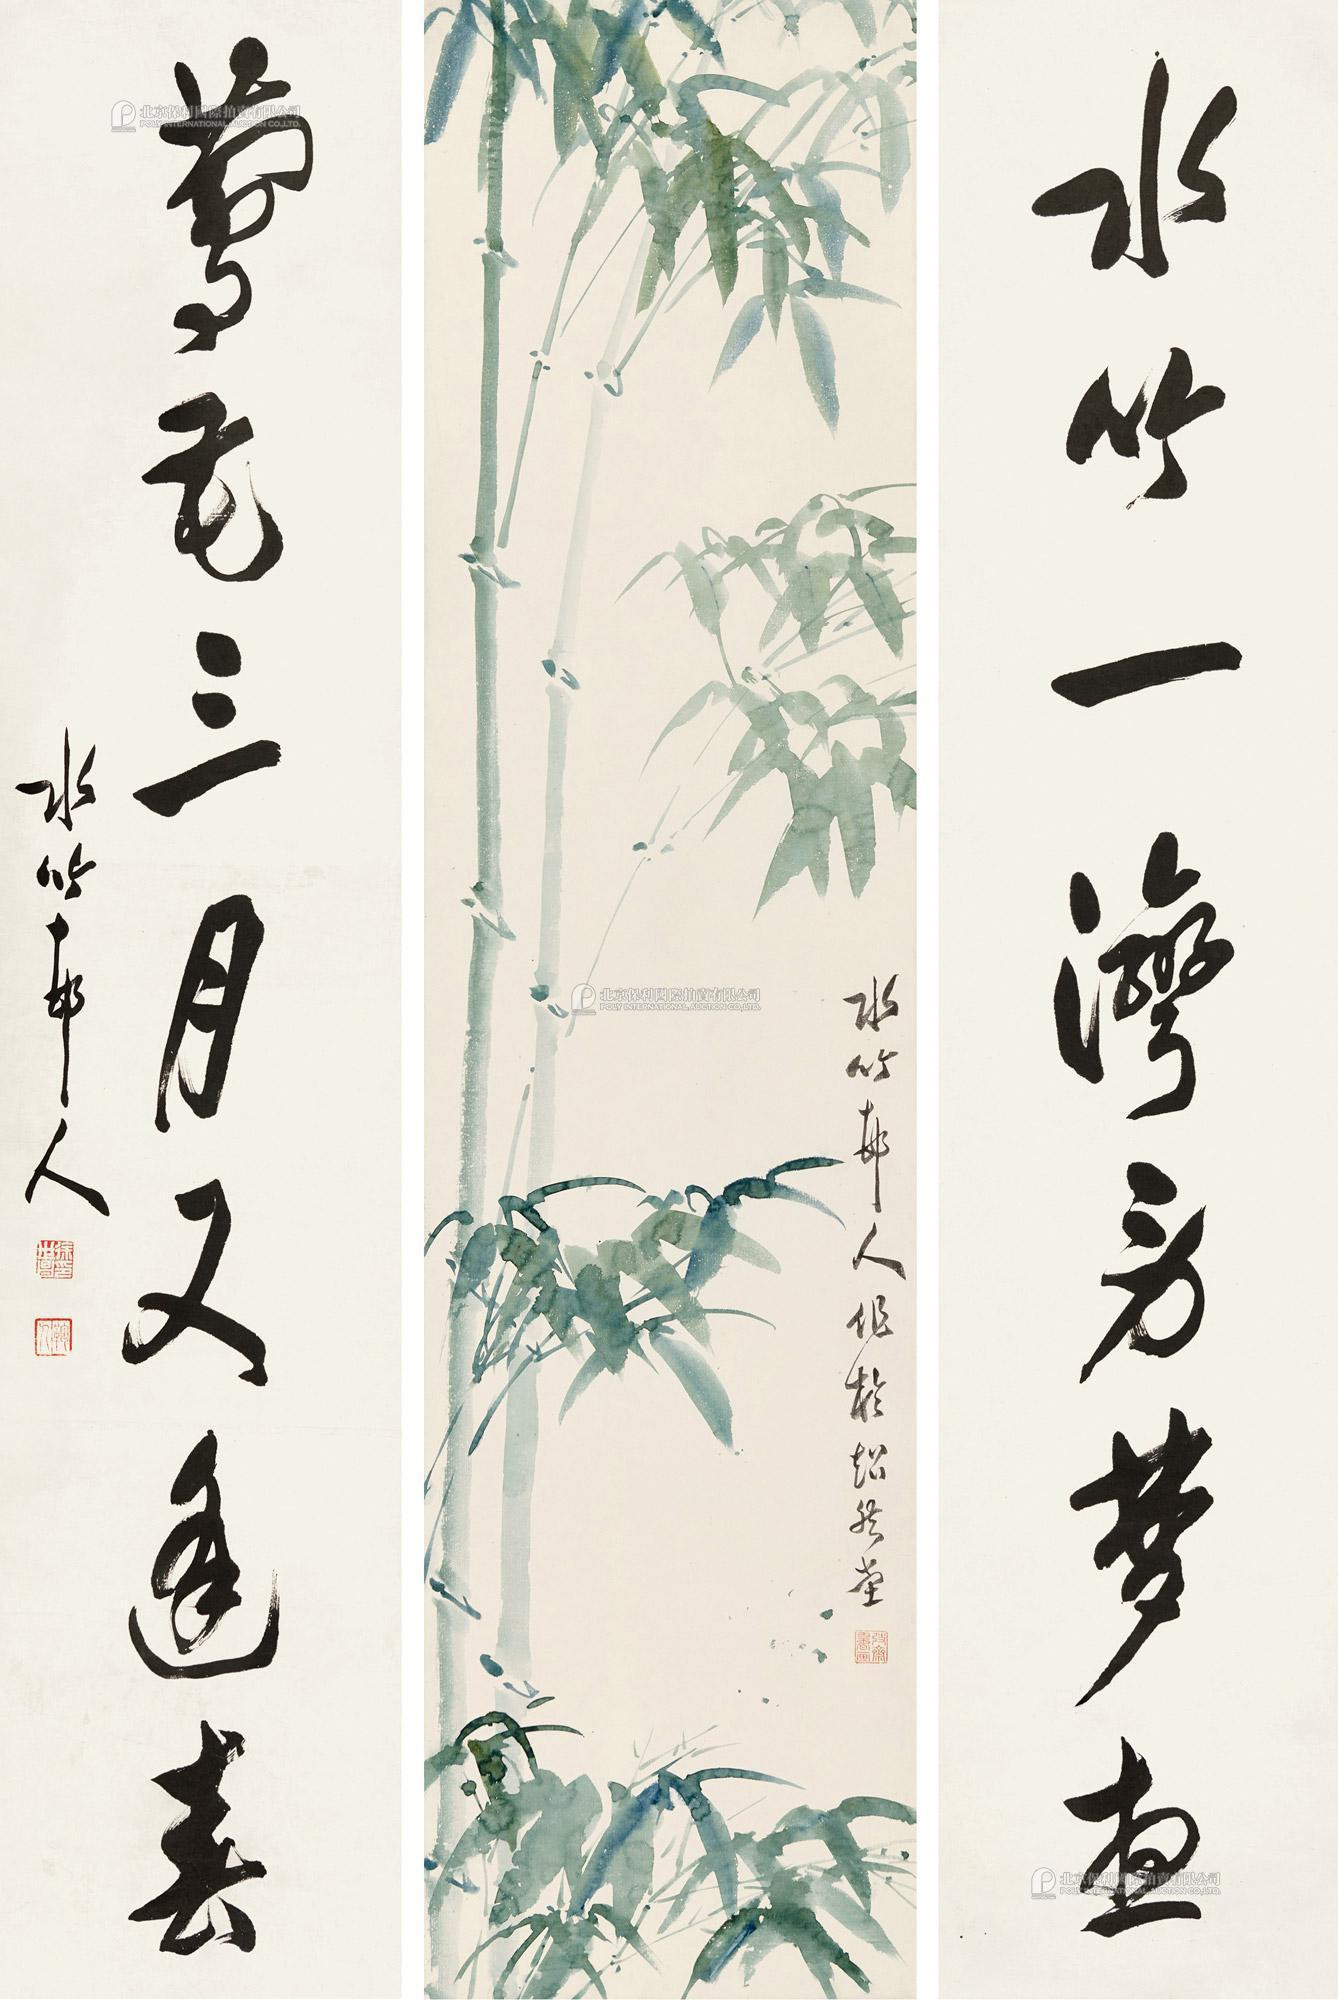 Bamboo And Calligraphic Couplet In Running Script